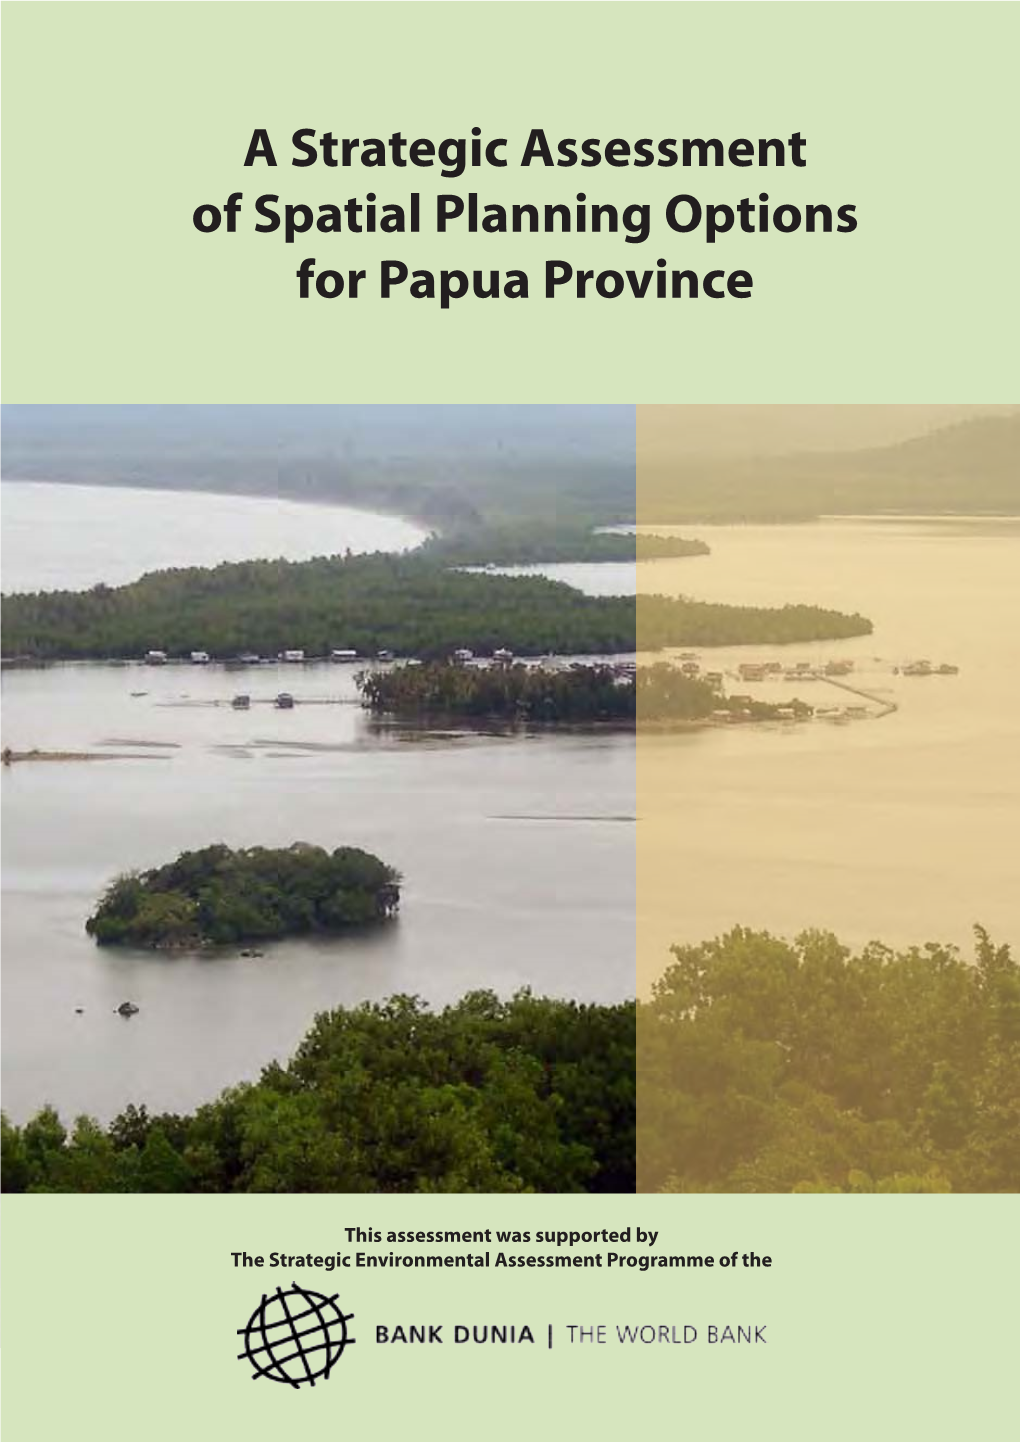 A Strategic Assessment of Spatial Planning Options for Papua Province